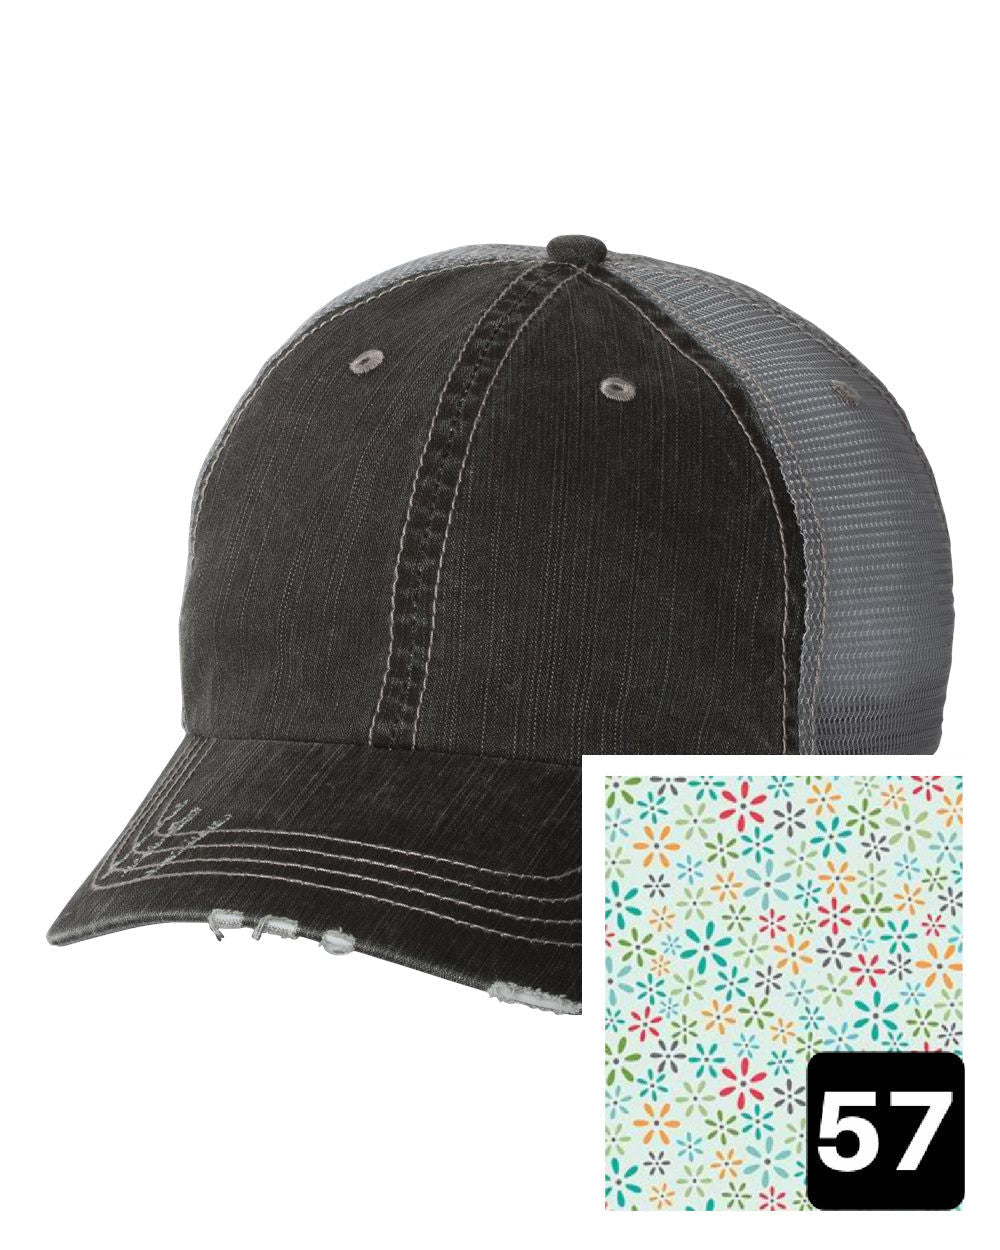 gray distressed trucker hat with white daisy on yellow fabric state of Kansas